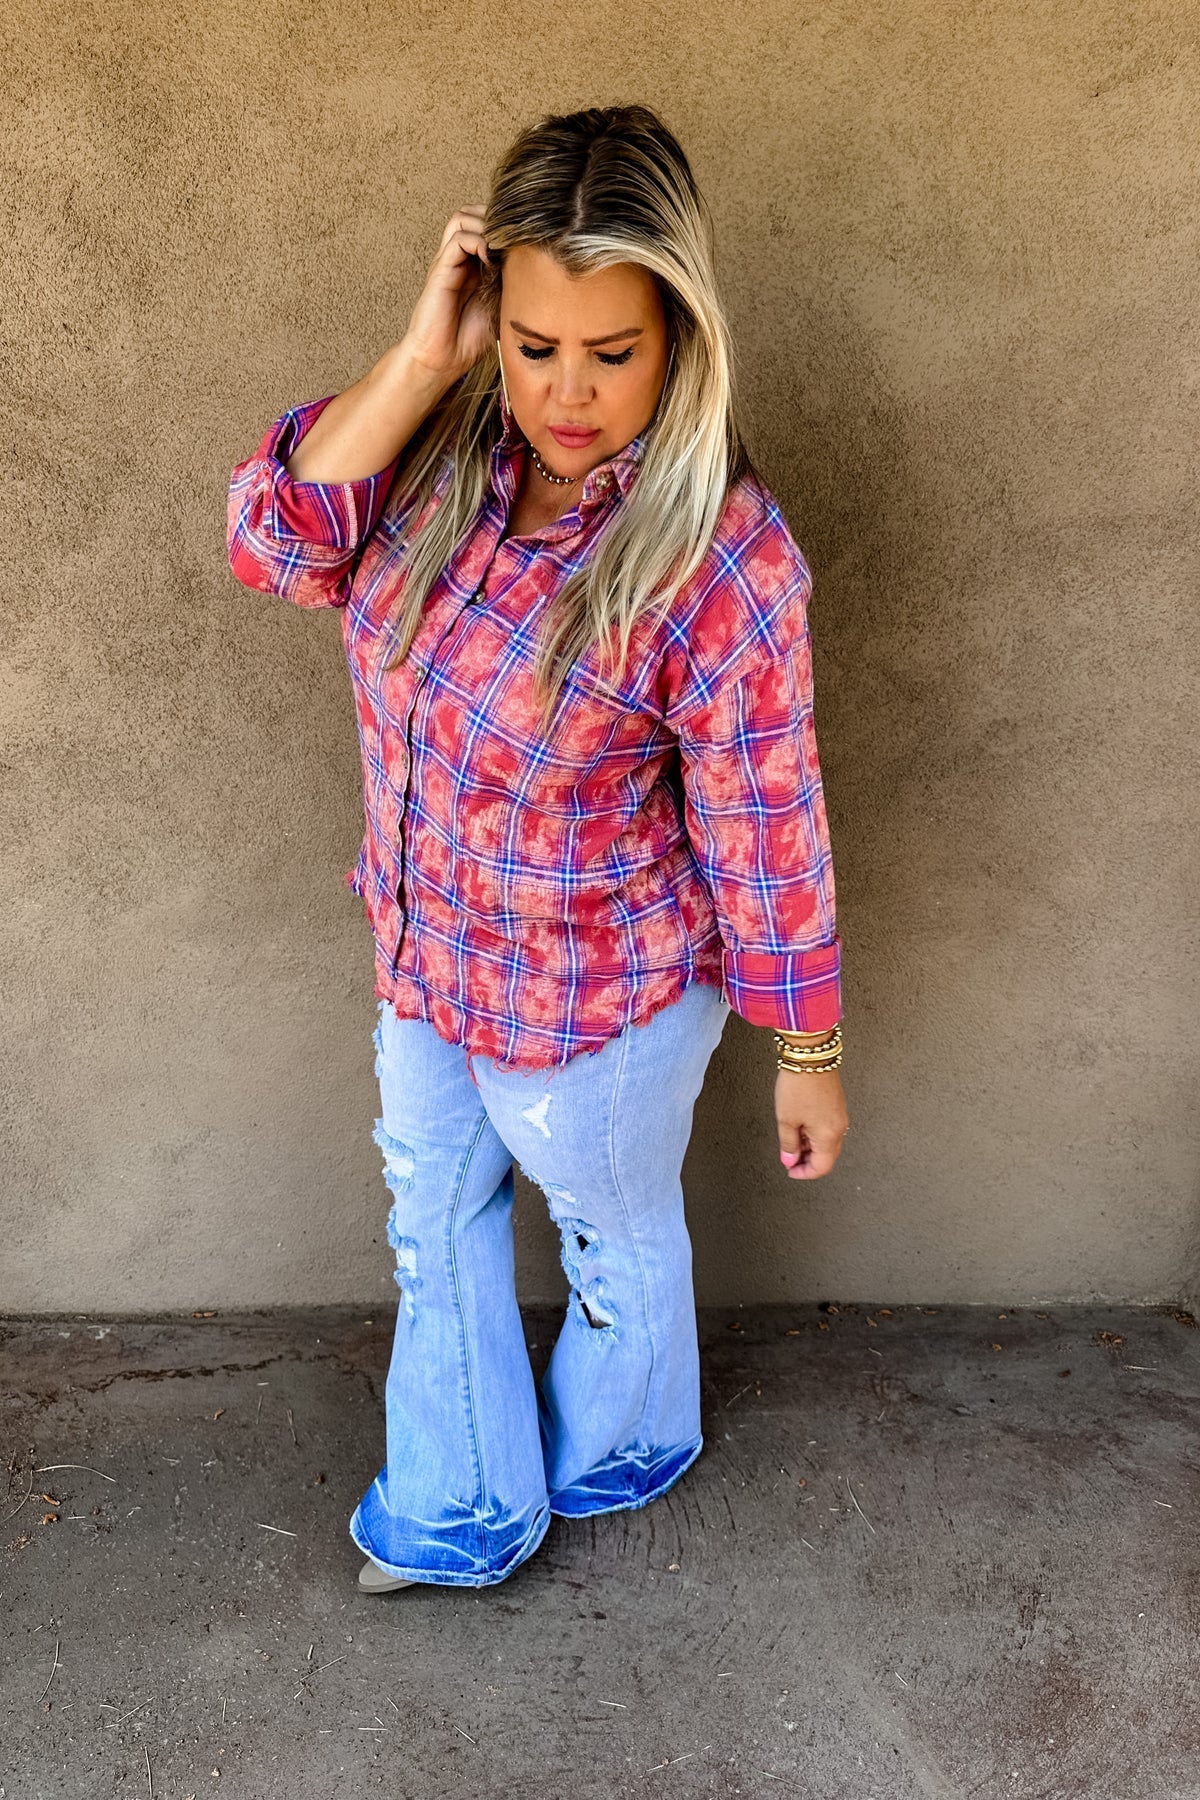 ✨PREORDER✨ Sizes 1-5X✨Blakeley Shiloh Flare  Jeans